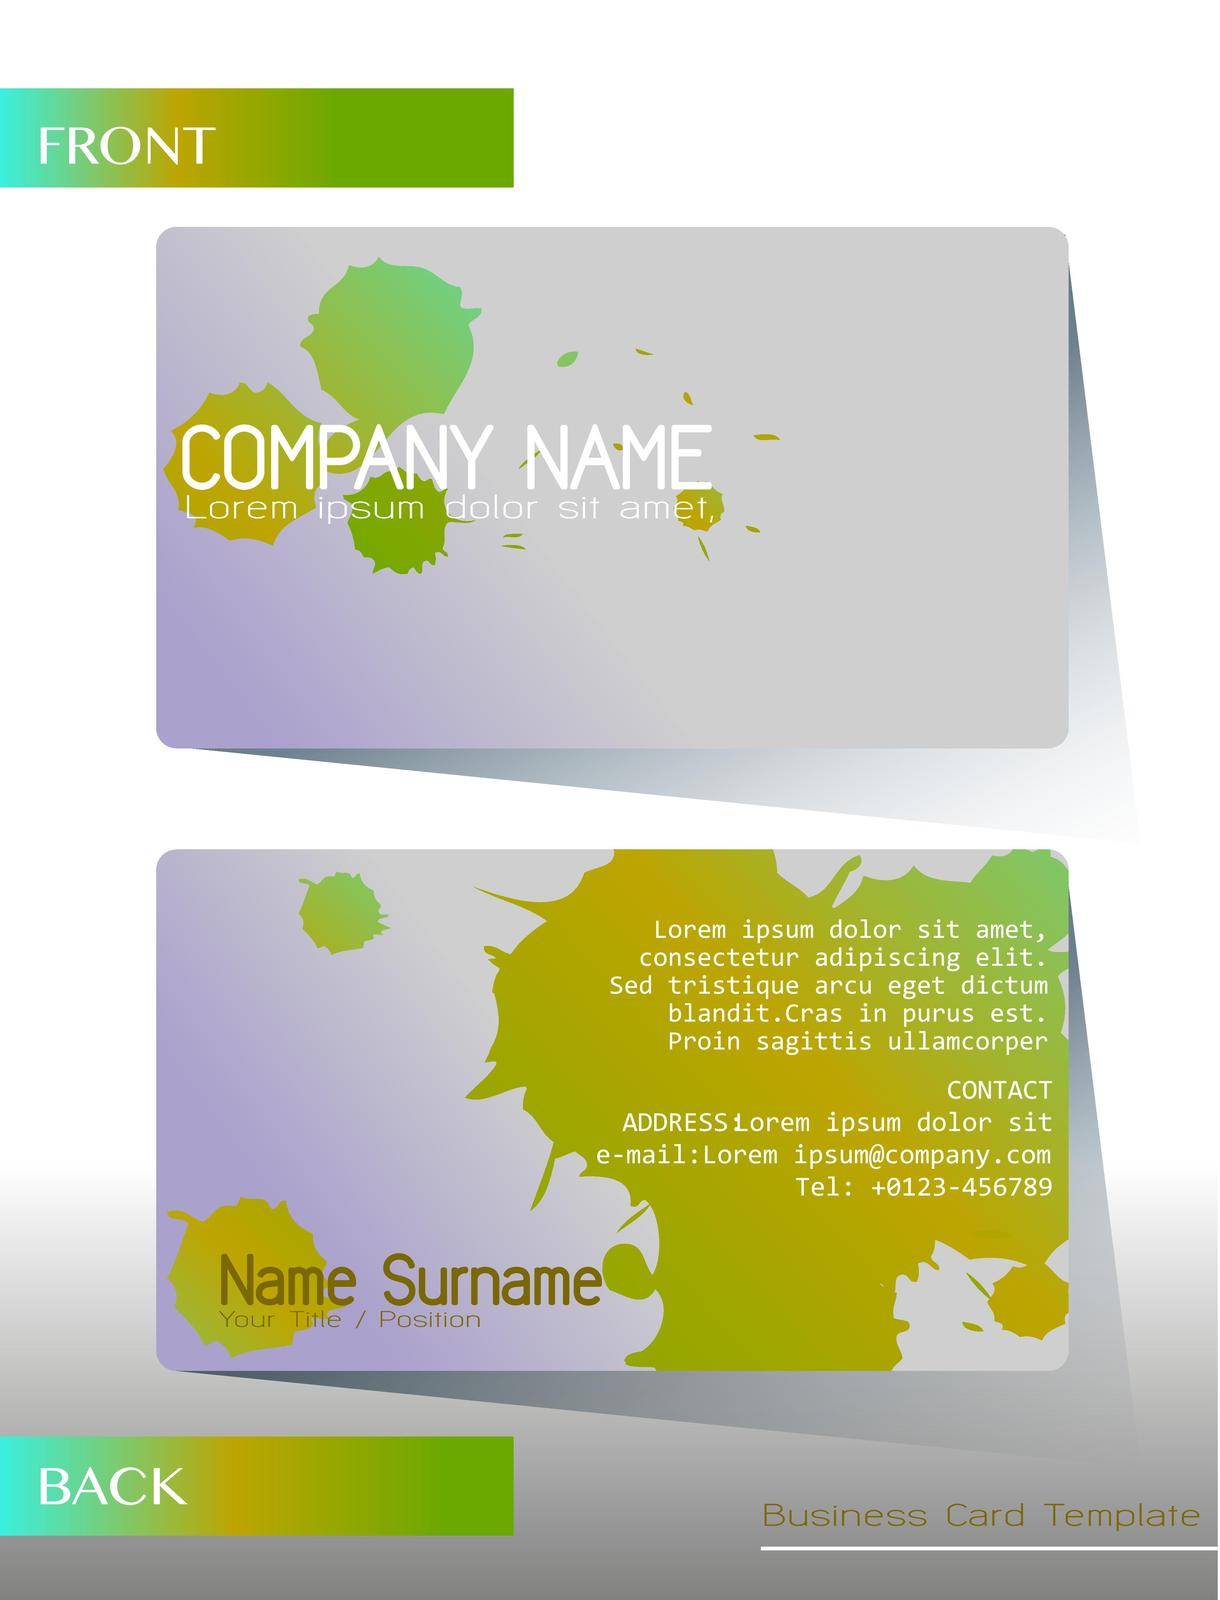 A grey and green coloured business card on a white background